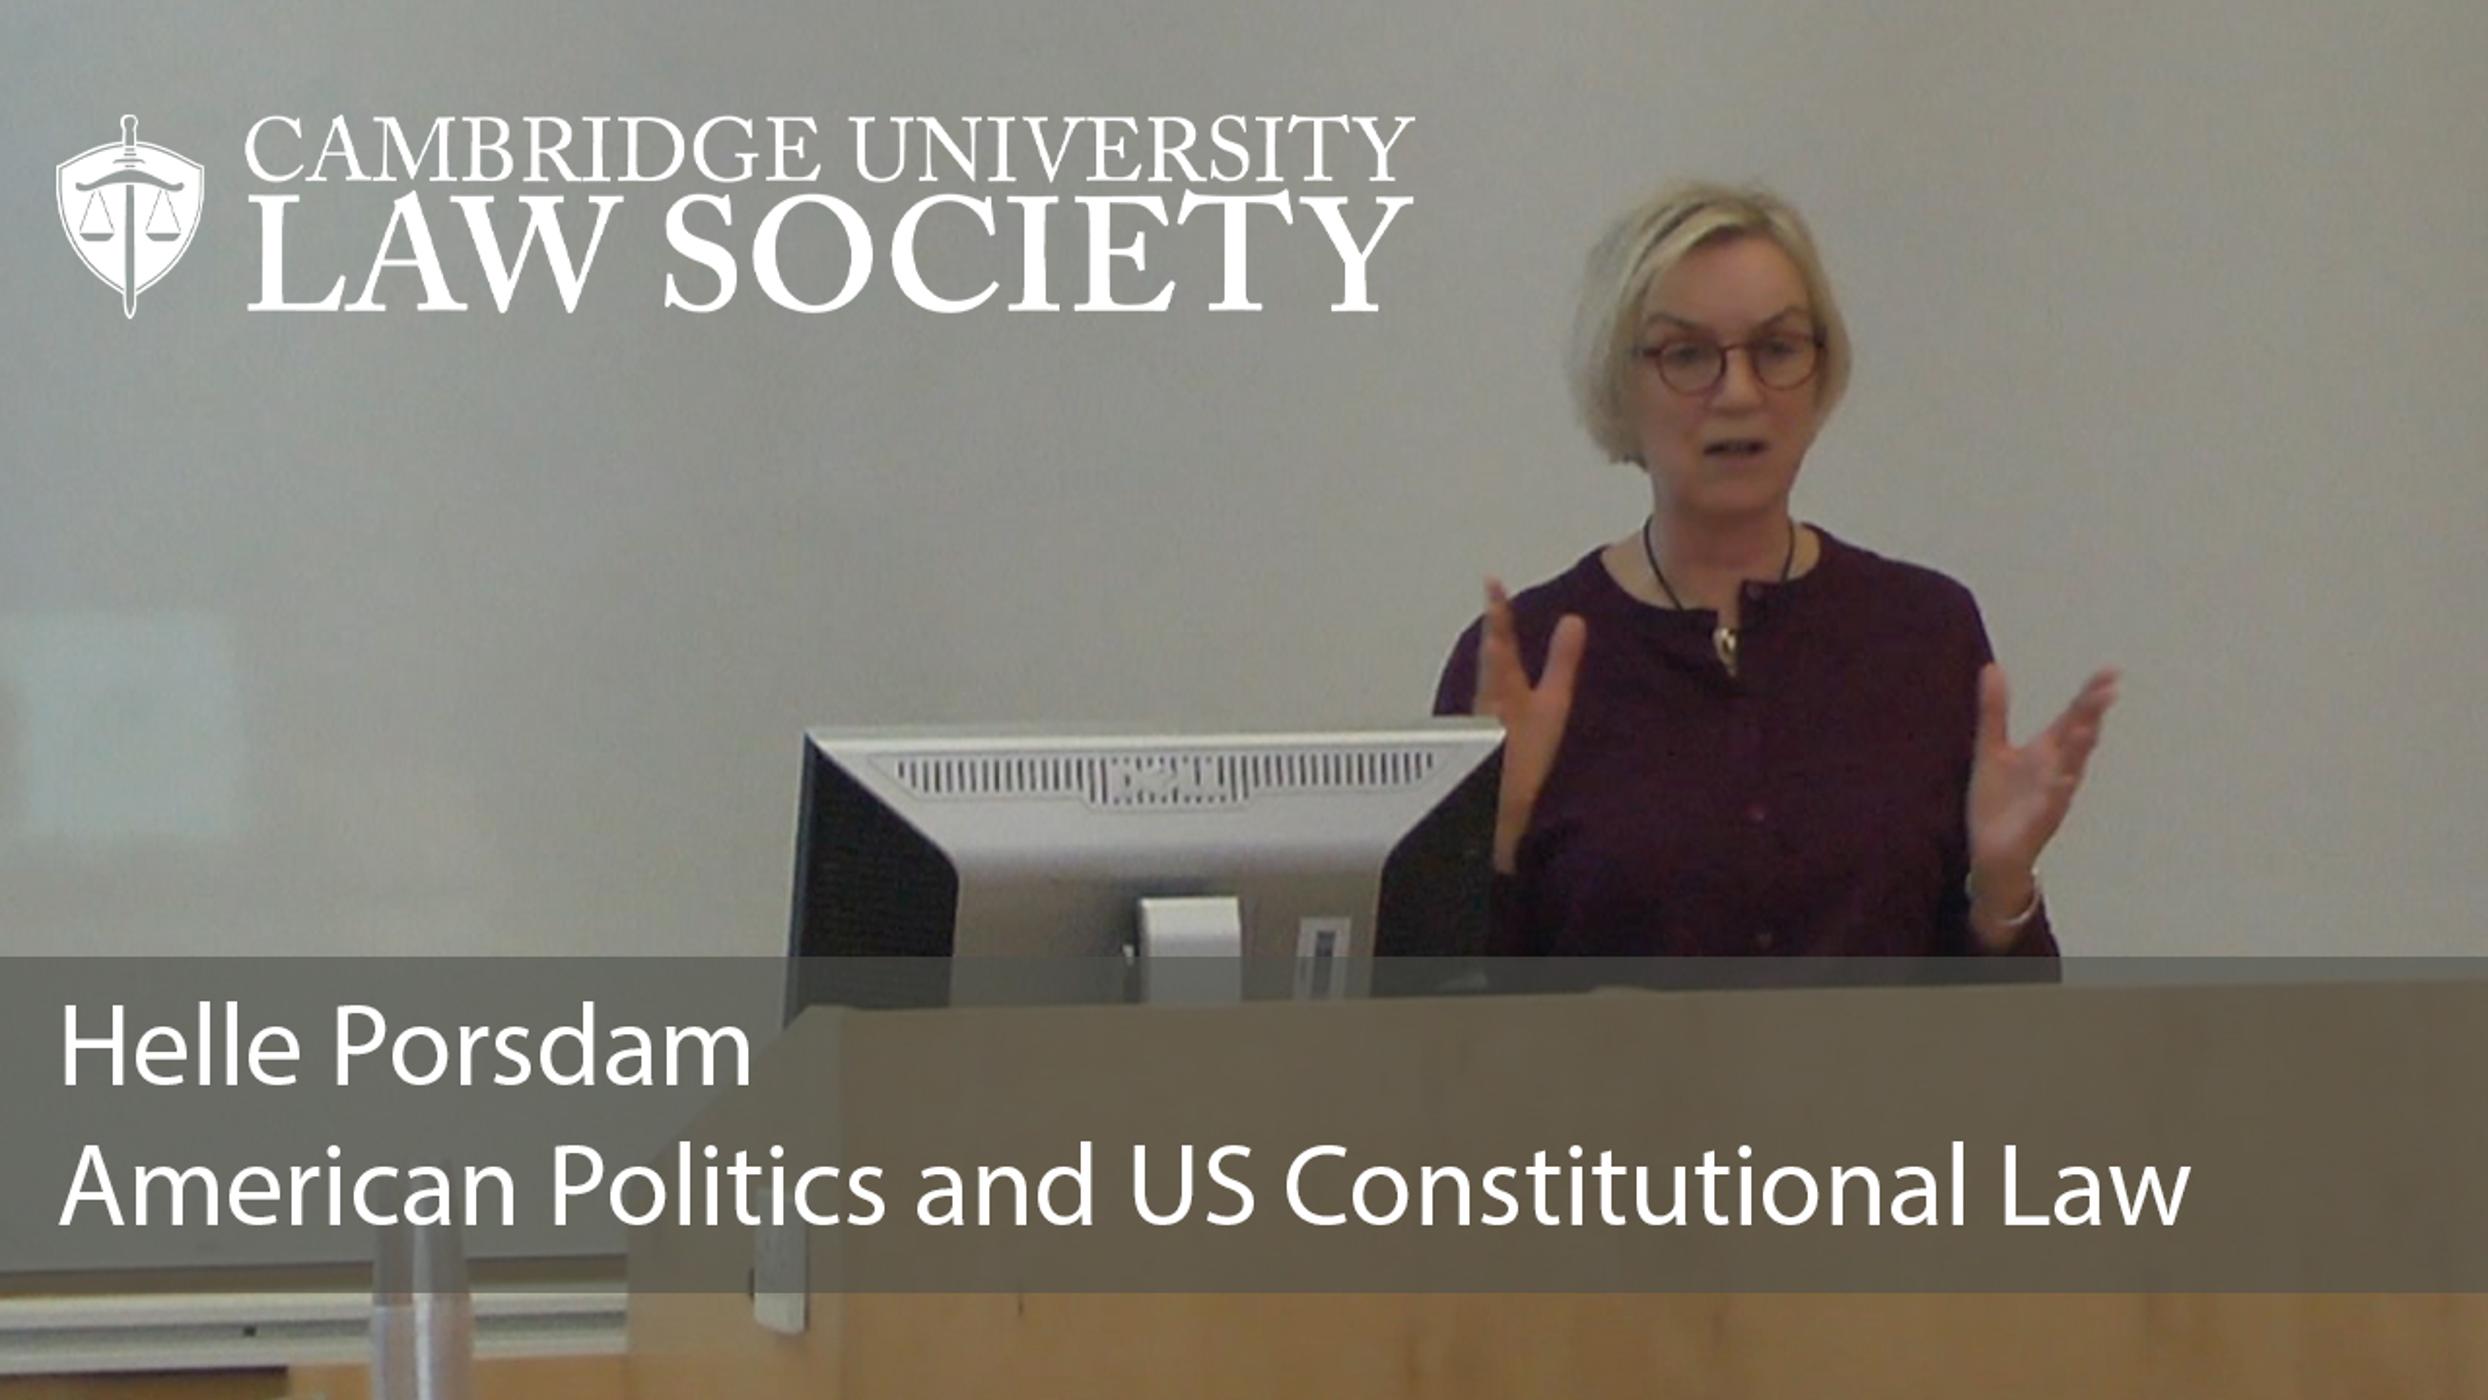 'American Politics and US Constitutional Law' - Helle Porsdam: CULS Lecture (audio)